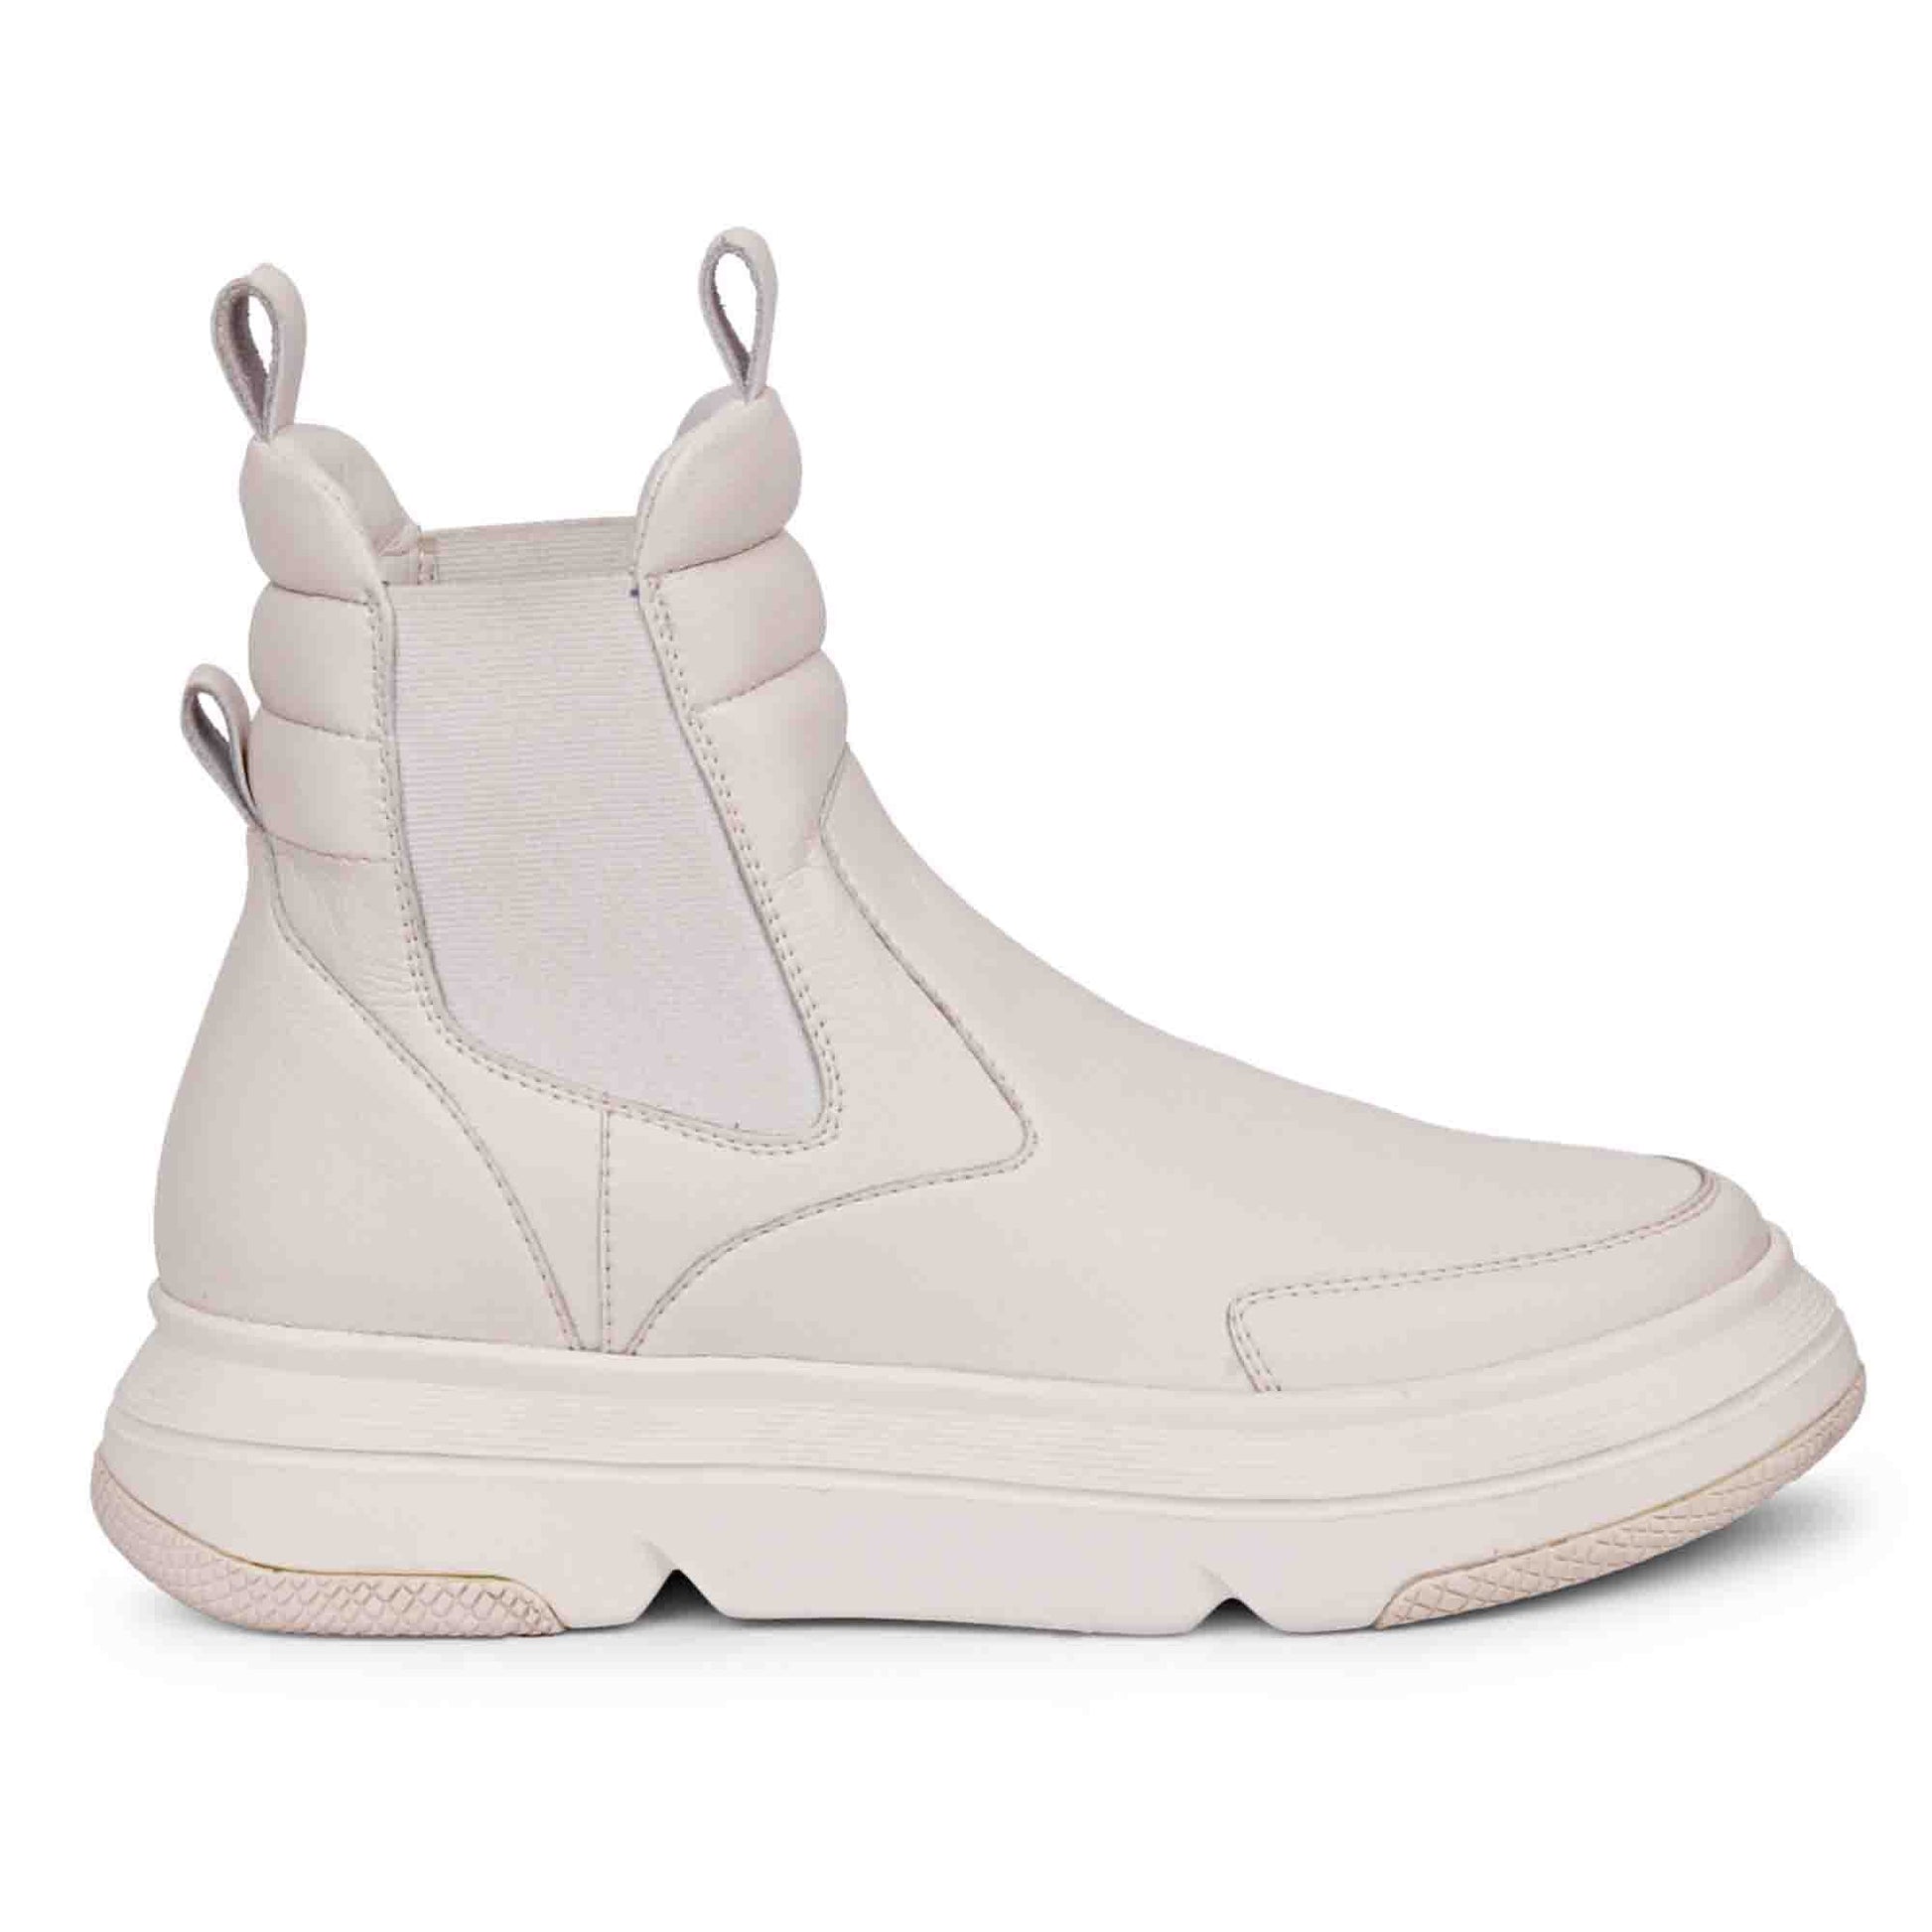 Sleek Whitesta Heather White Leather Sneakers - Timeless style meets comfort in these chic white leather sneakers for a modern, fashionable look